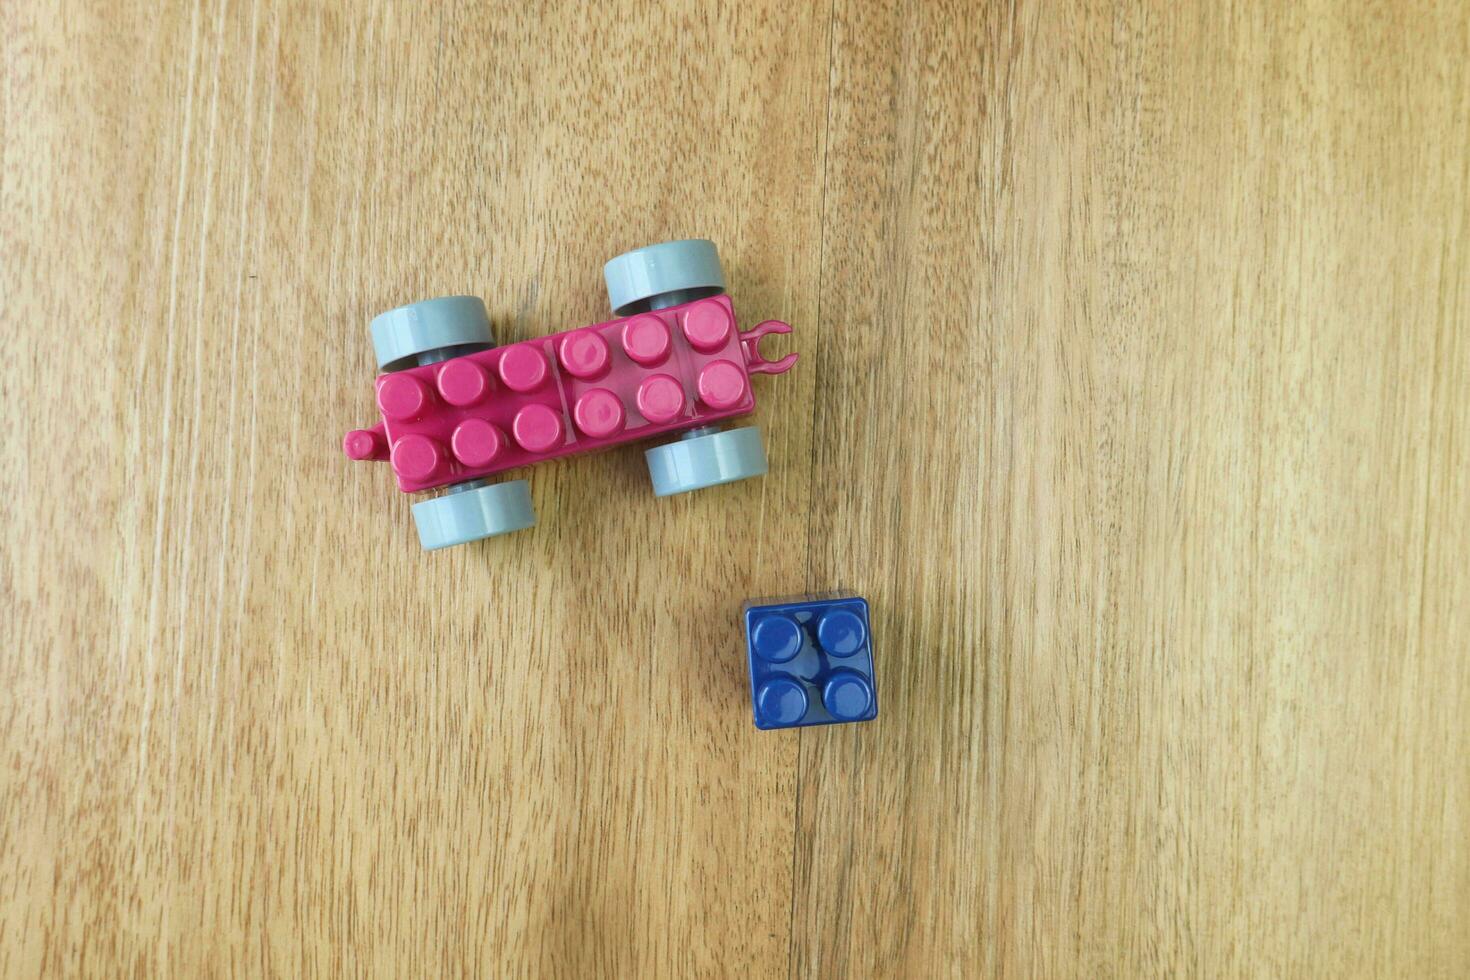 Top view of plastic building blocks on wooden background photo